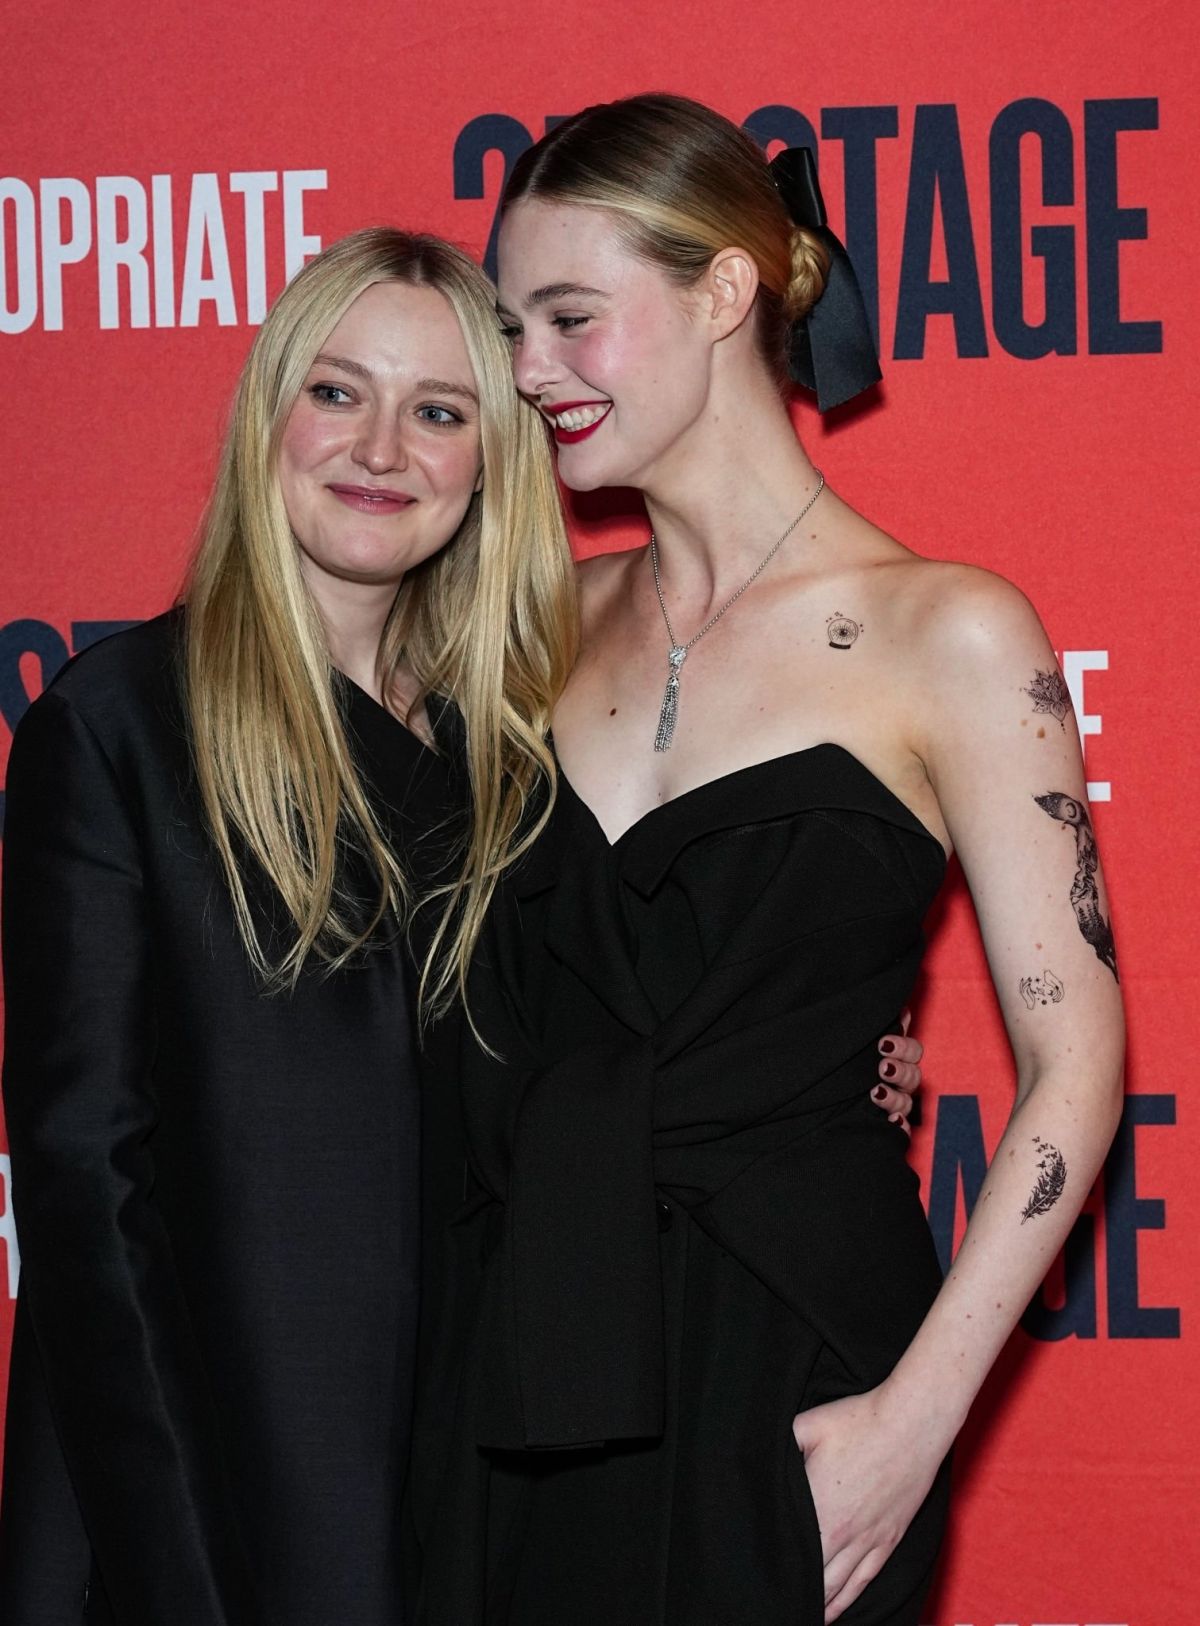 Dakota and Elle Fanning Sisters at Broadway Opening Night in NYC 2